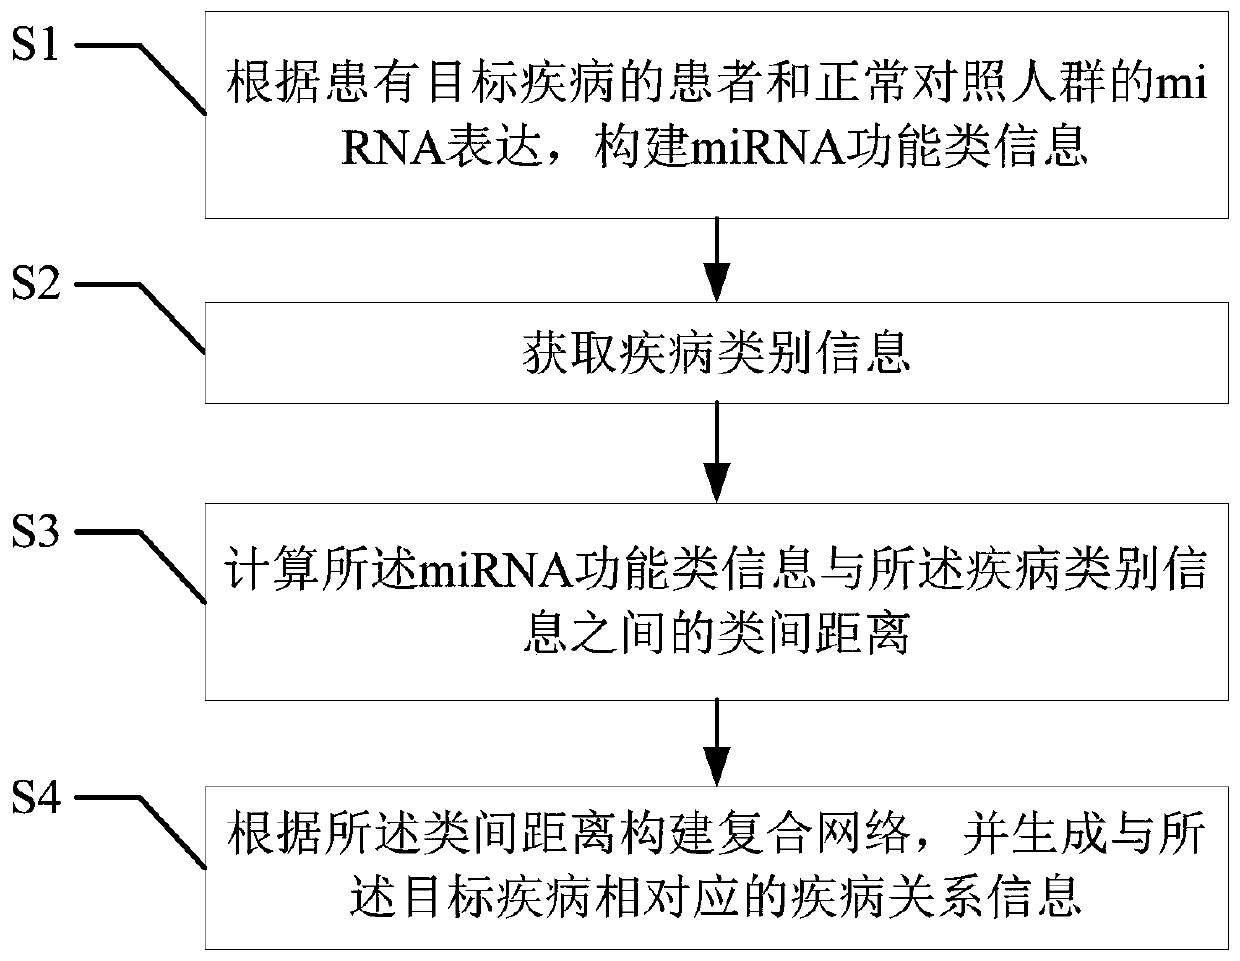 A method and device for analyzing the relationship between diseases based on miRNA